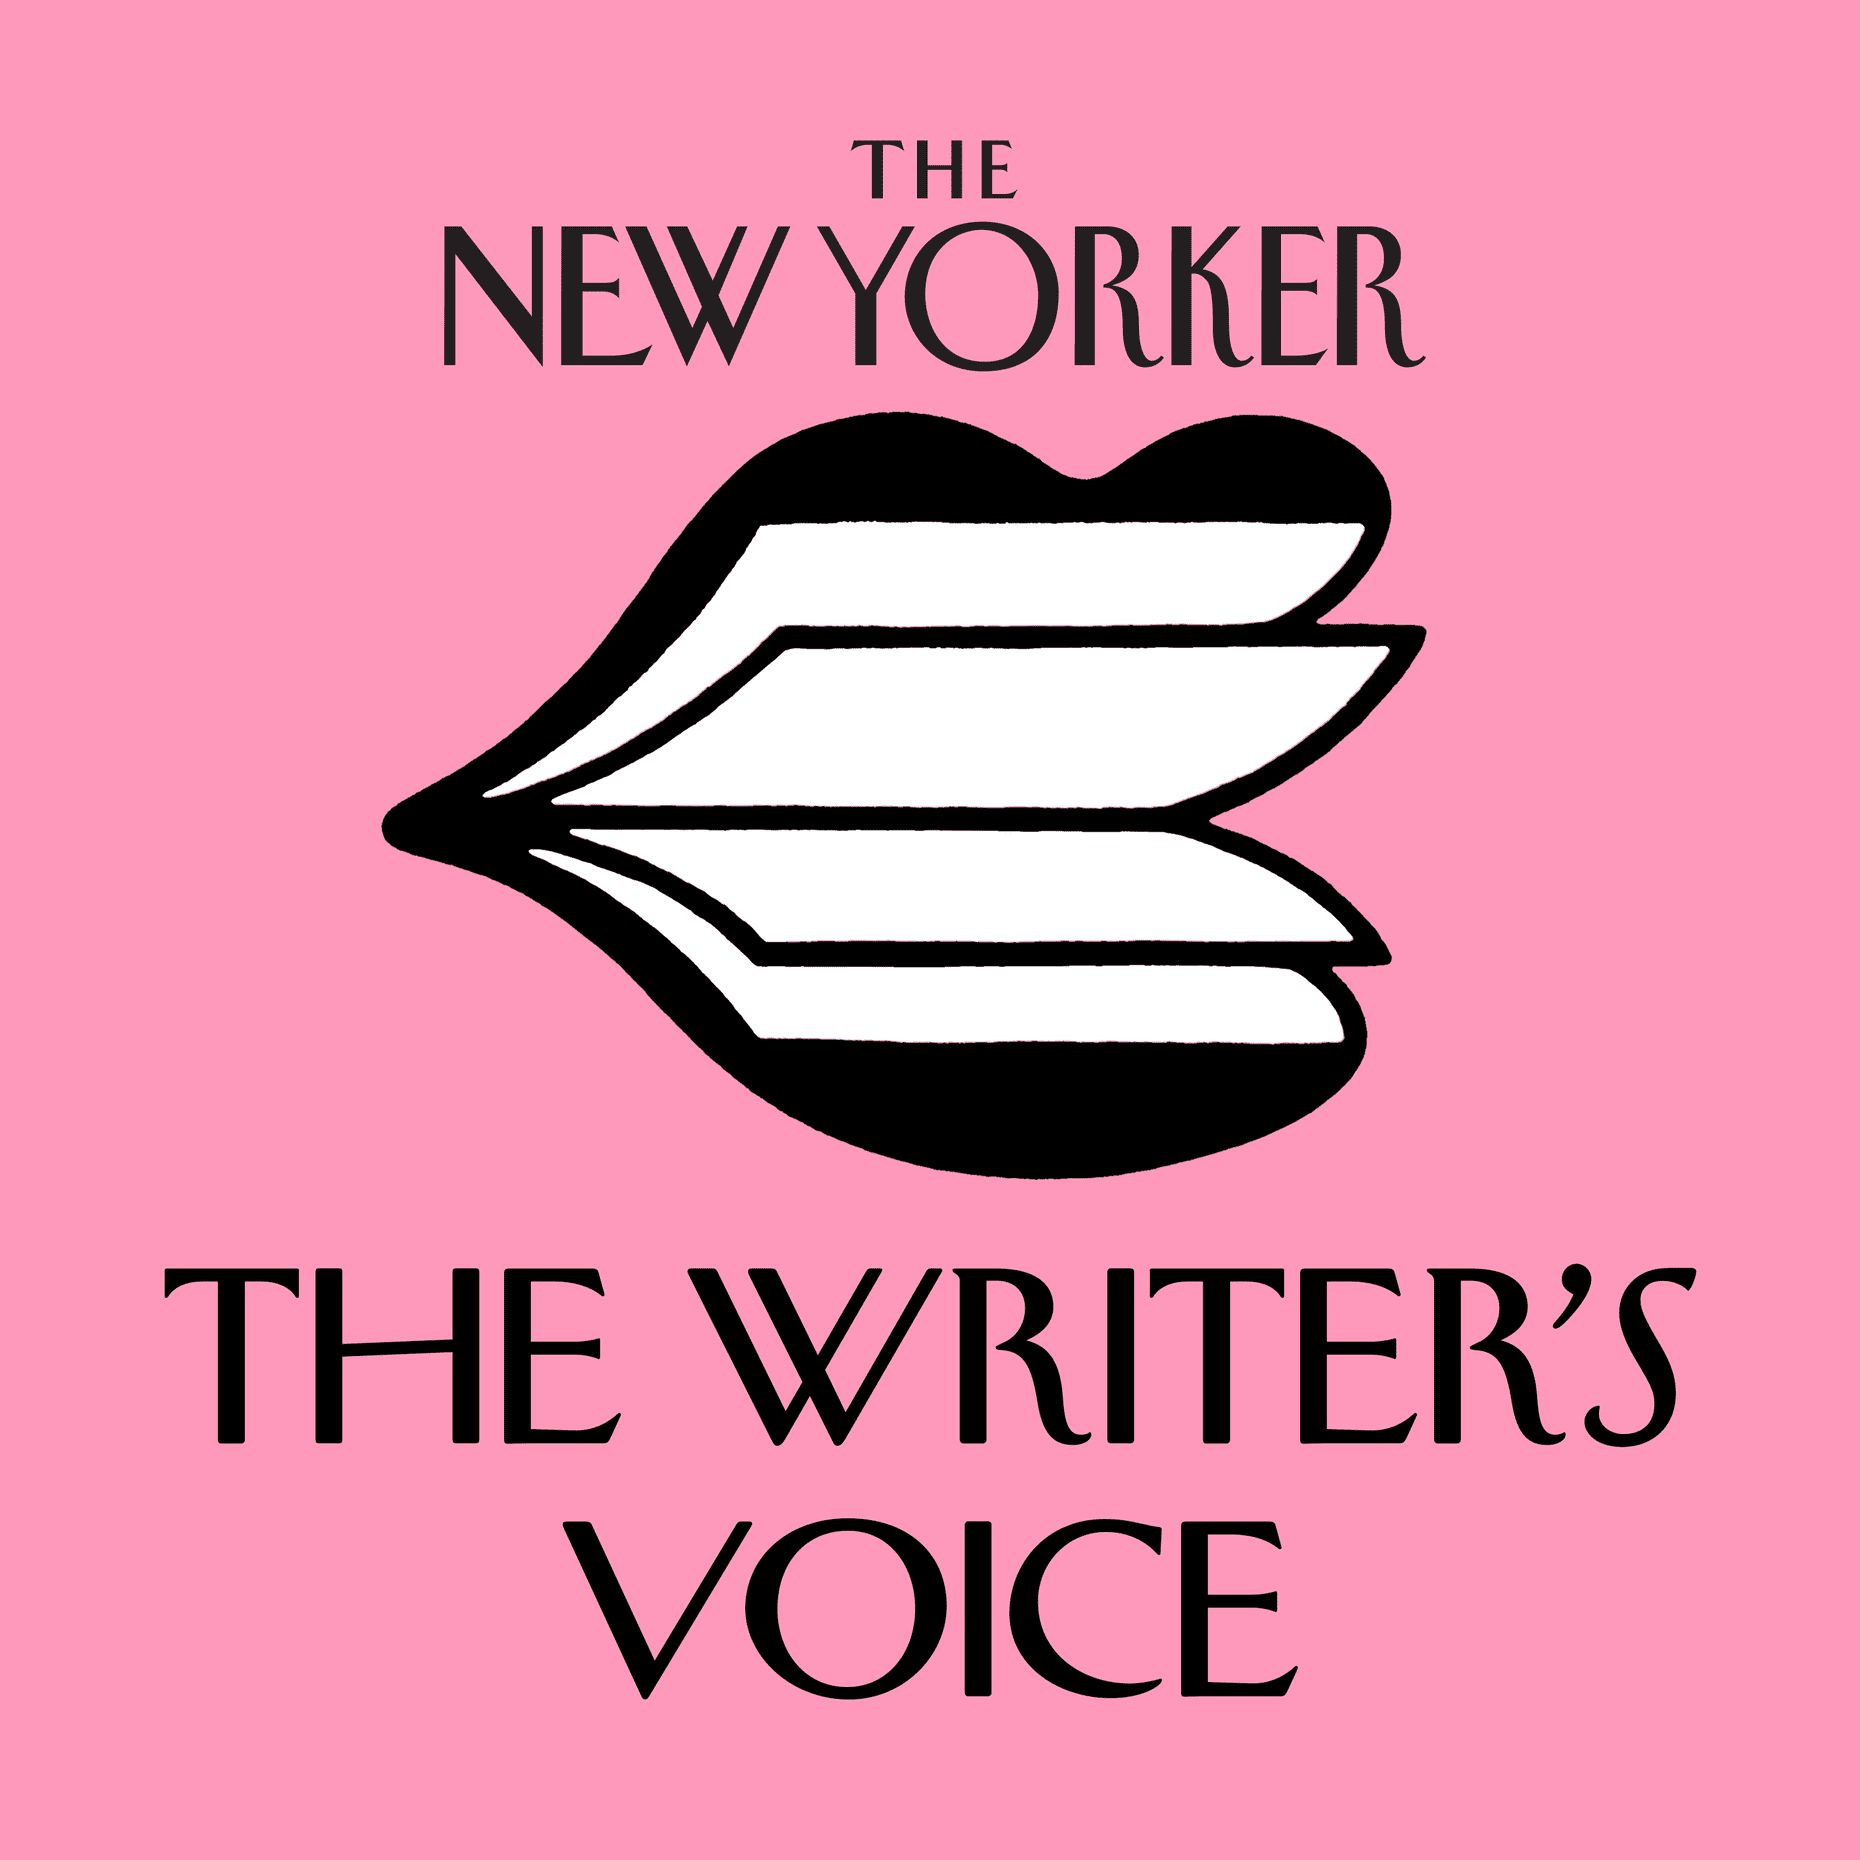 The New Yorker: The Writer's Voice - New Fiction from The New Yorker podcast